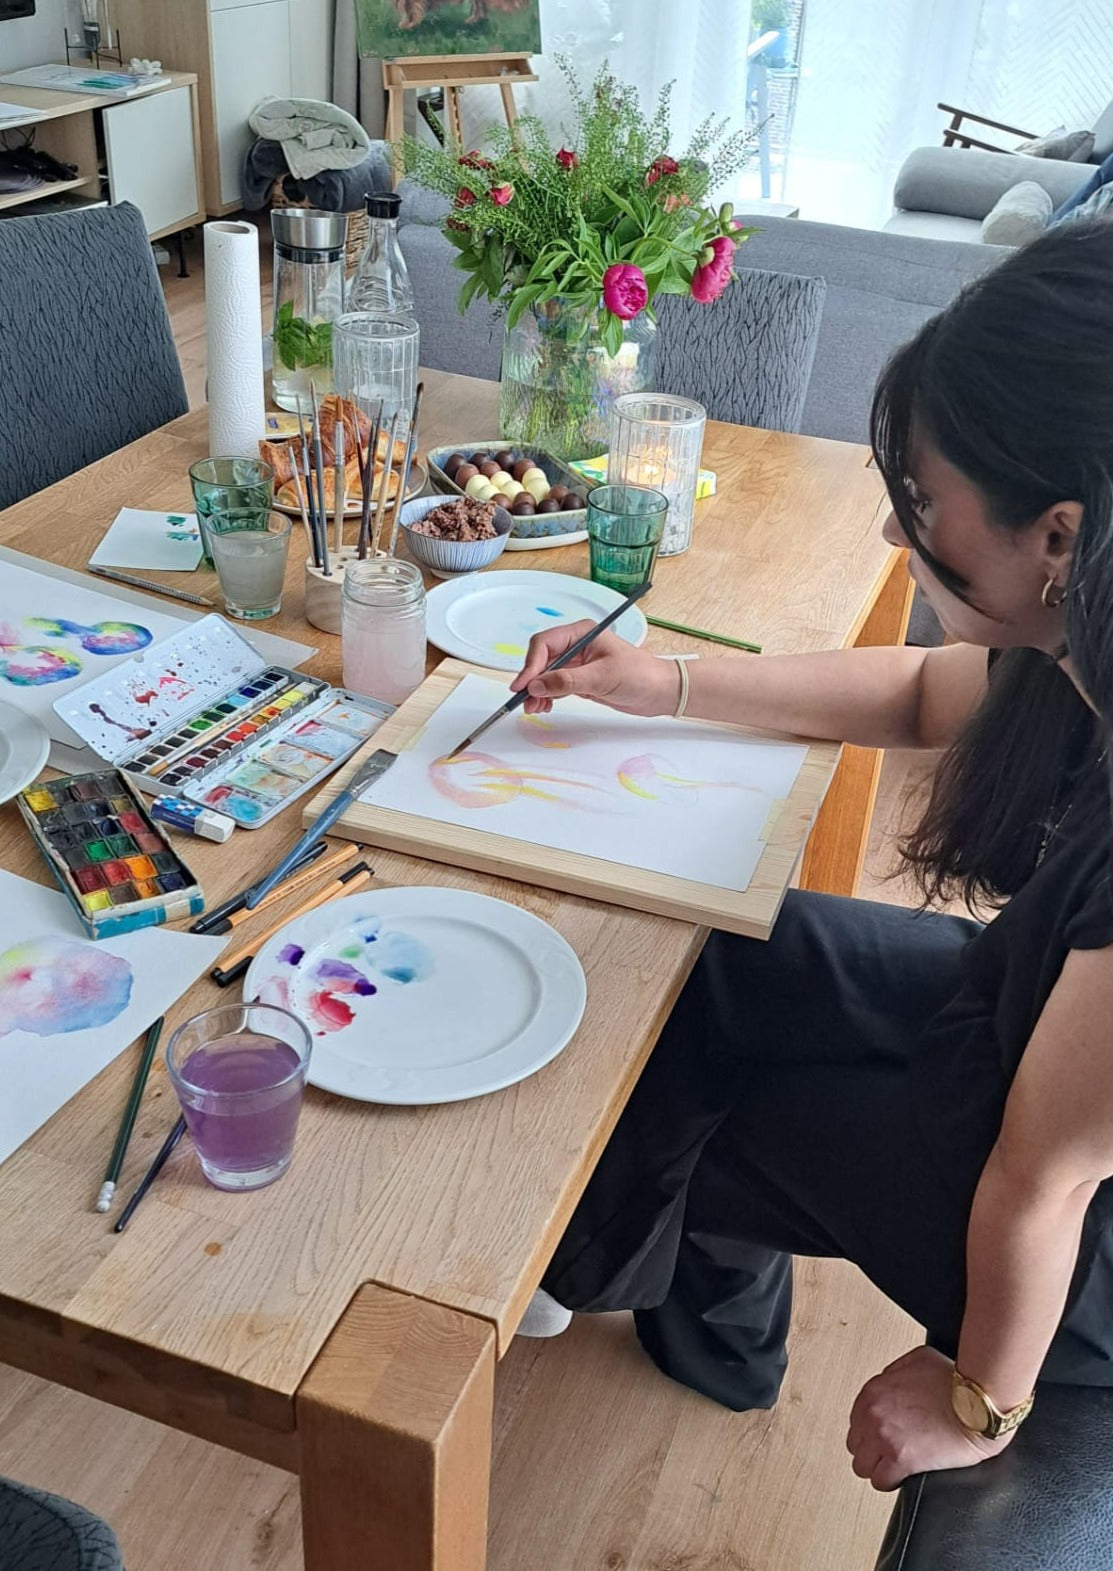 Unique Art & Lively Watercolor Workshop with Slata in Hamburg, Germany by subcultours